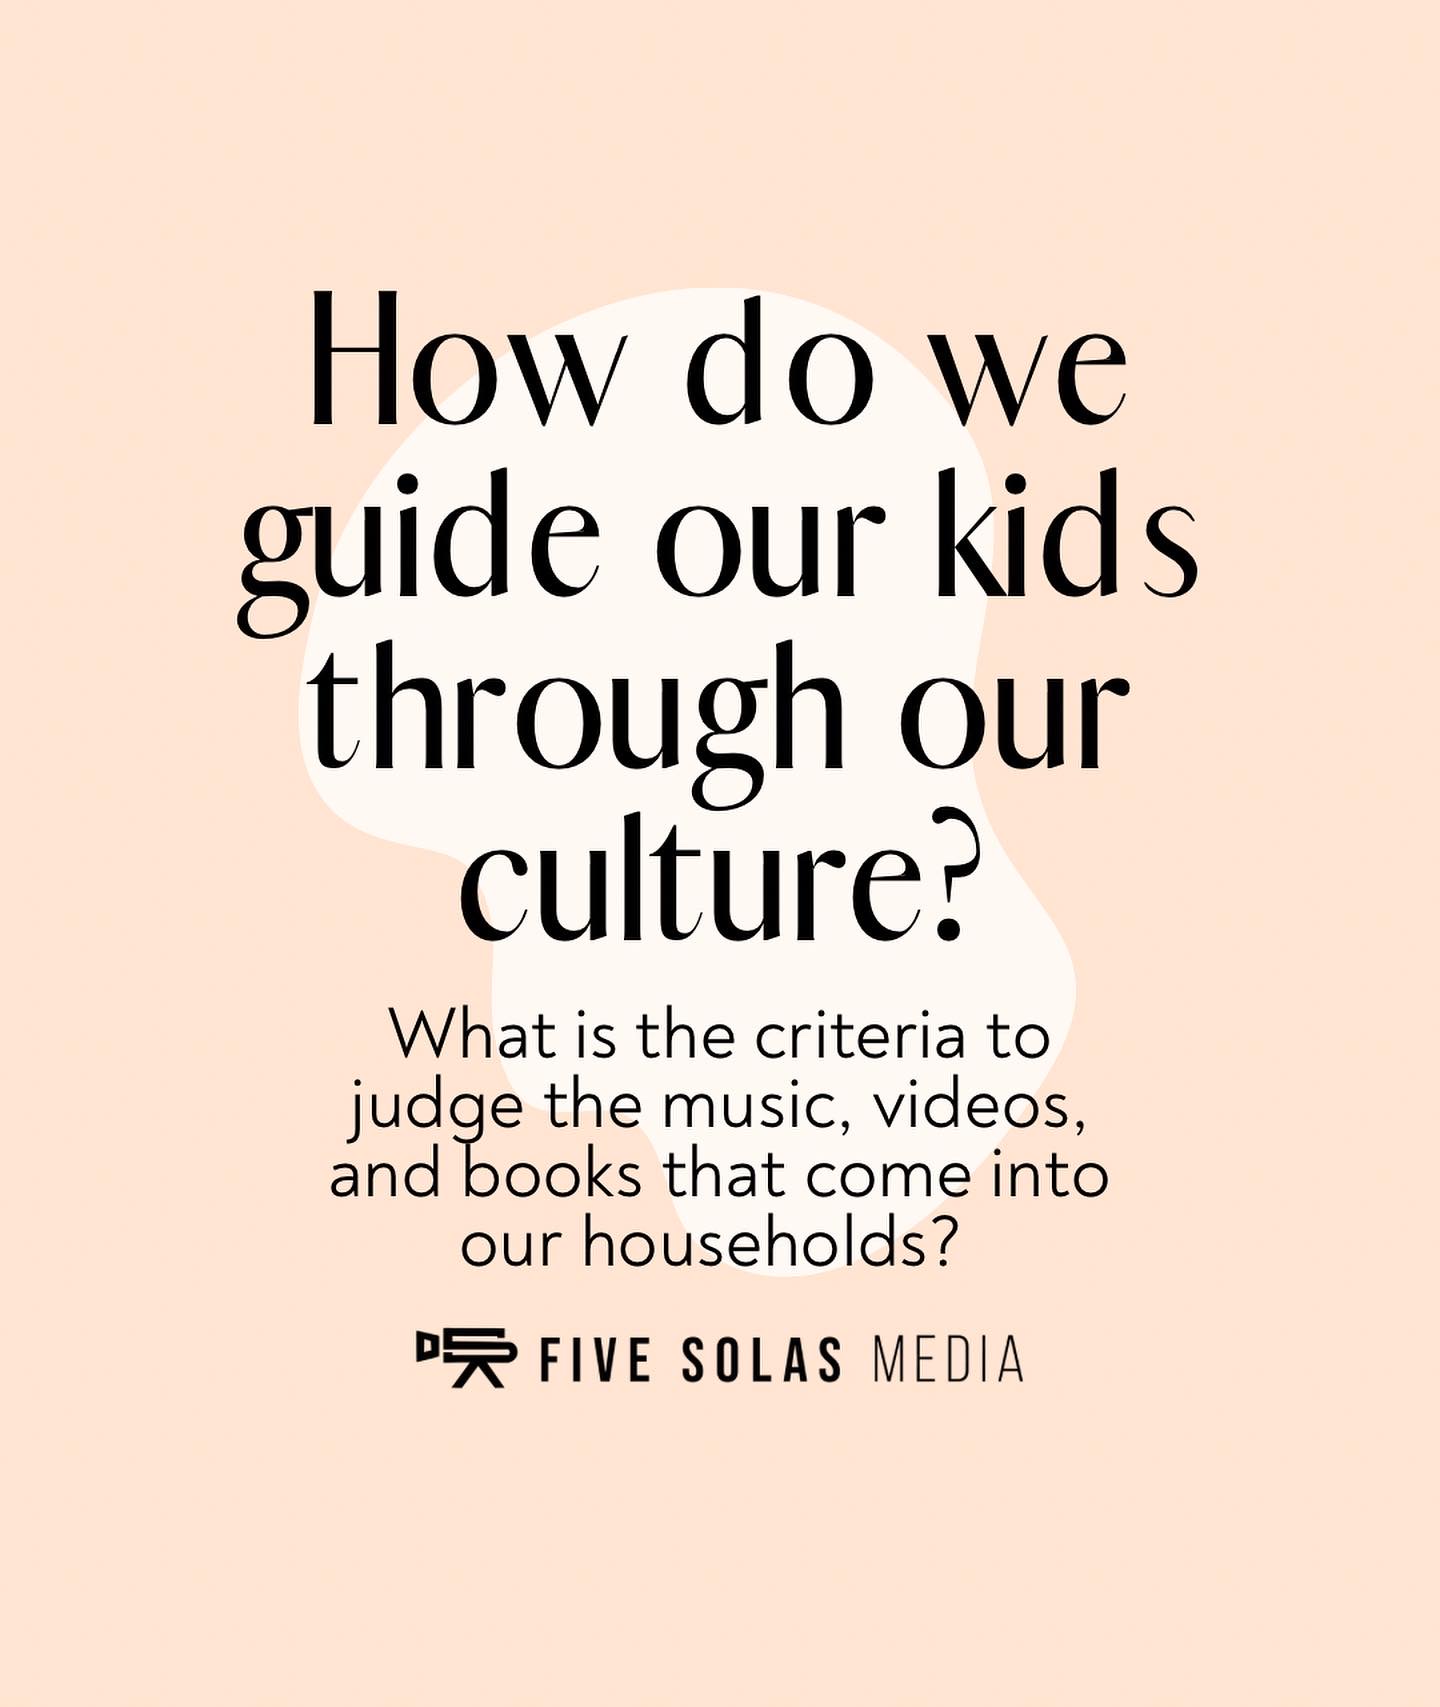 How do we guide our kids through our culture?